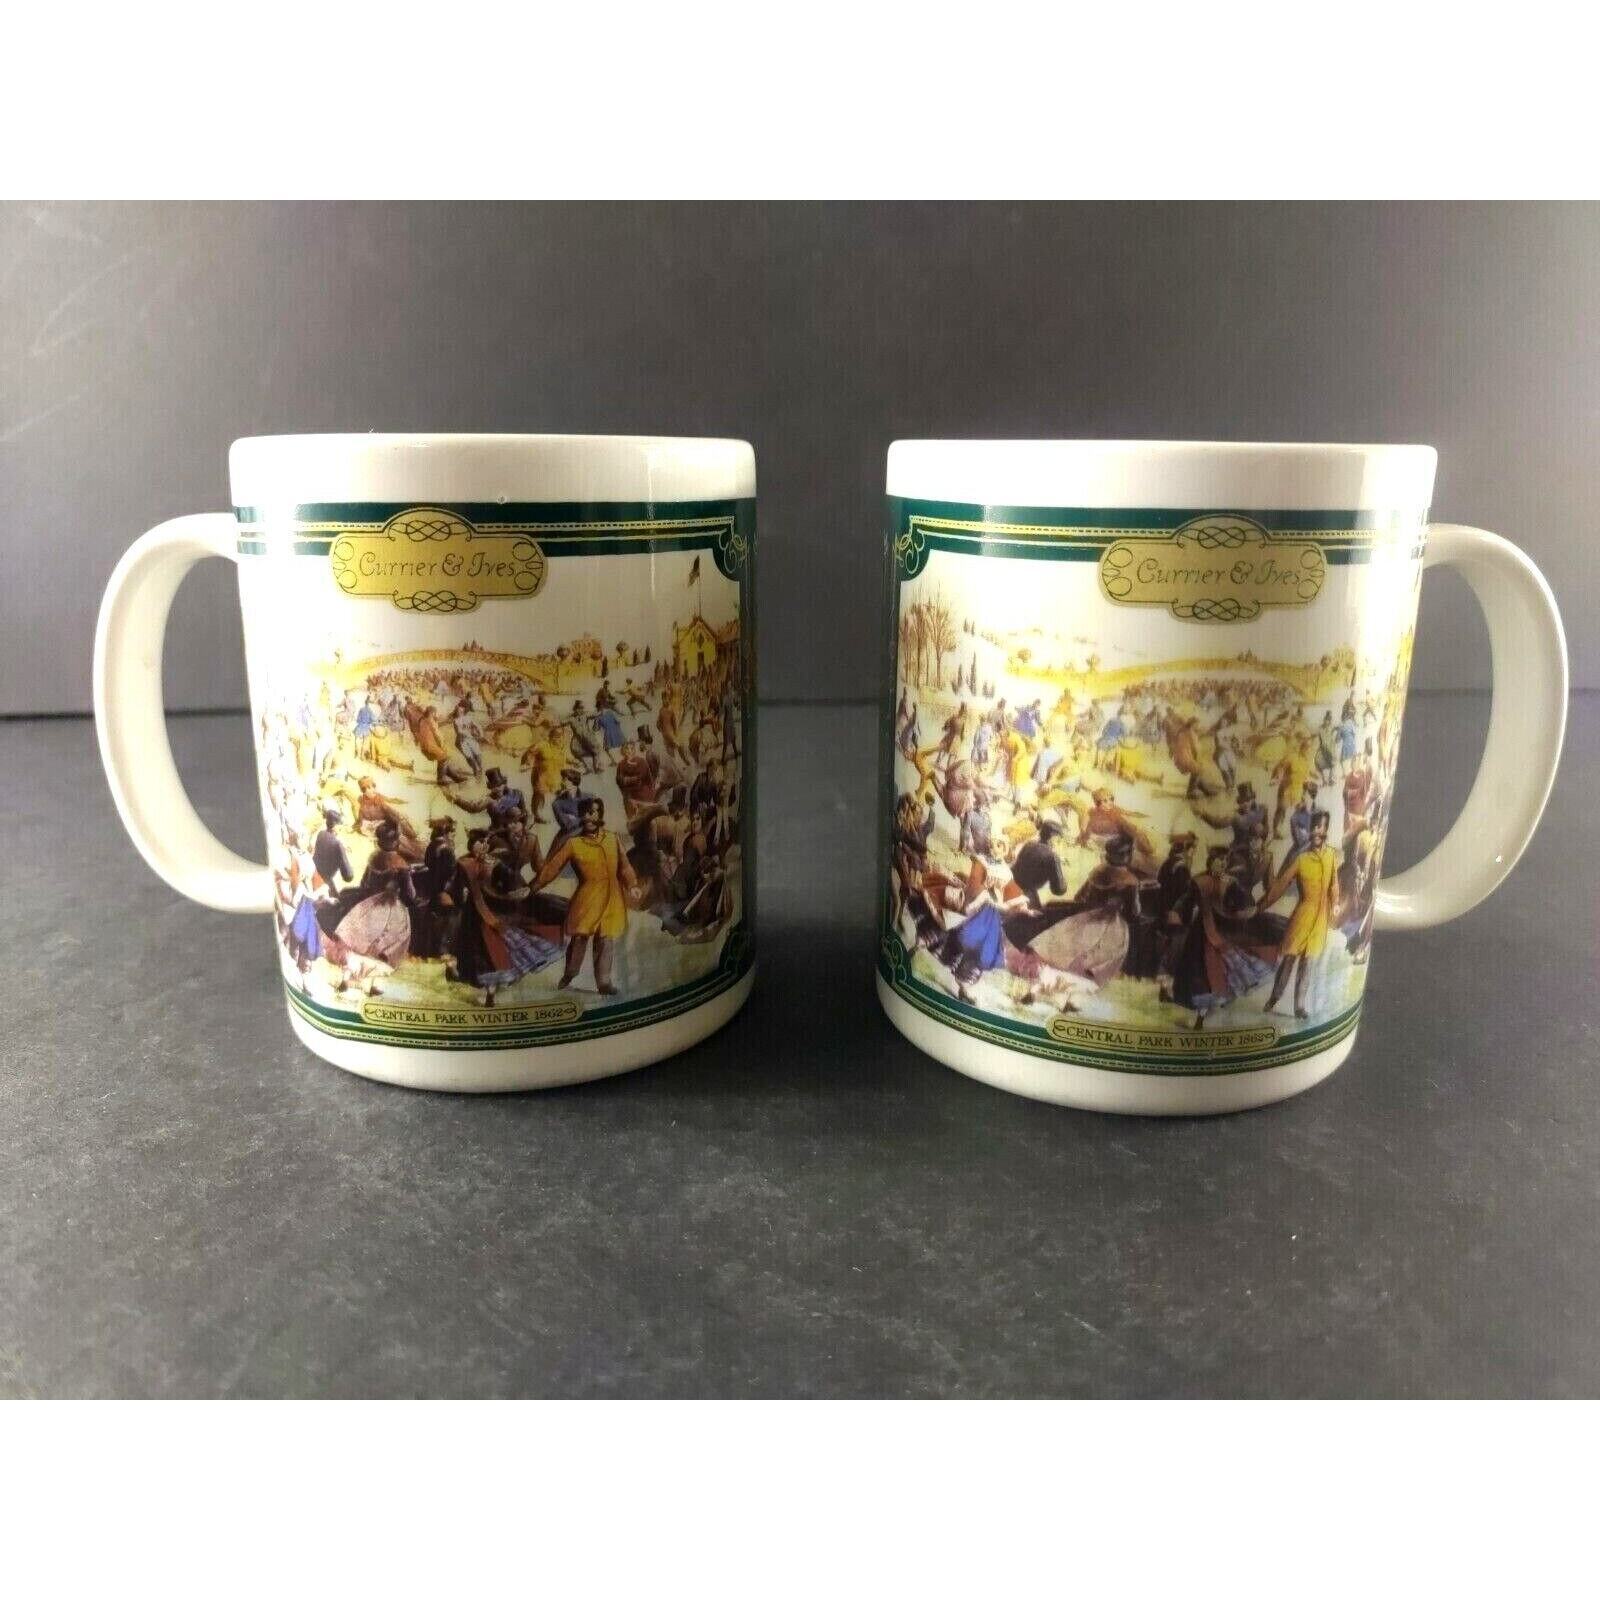 Currier and Ives Coffee Mug Cup Central Park Winter 1862 Vintage Collectors Mugs